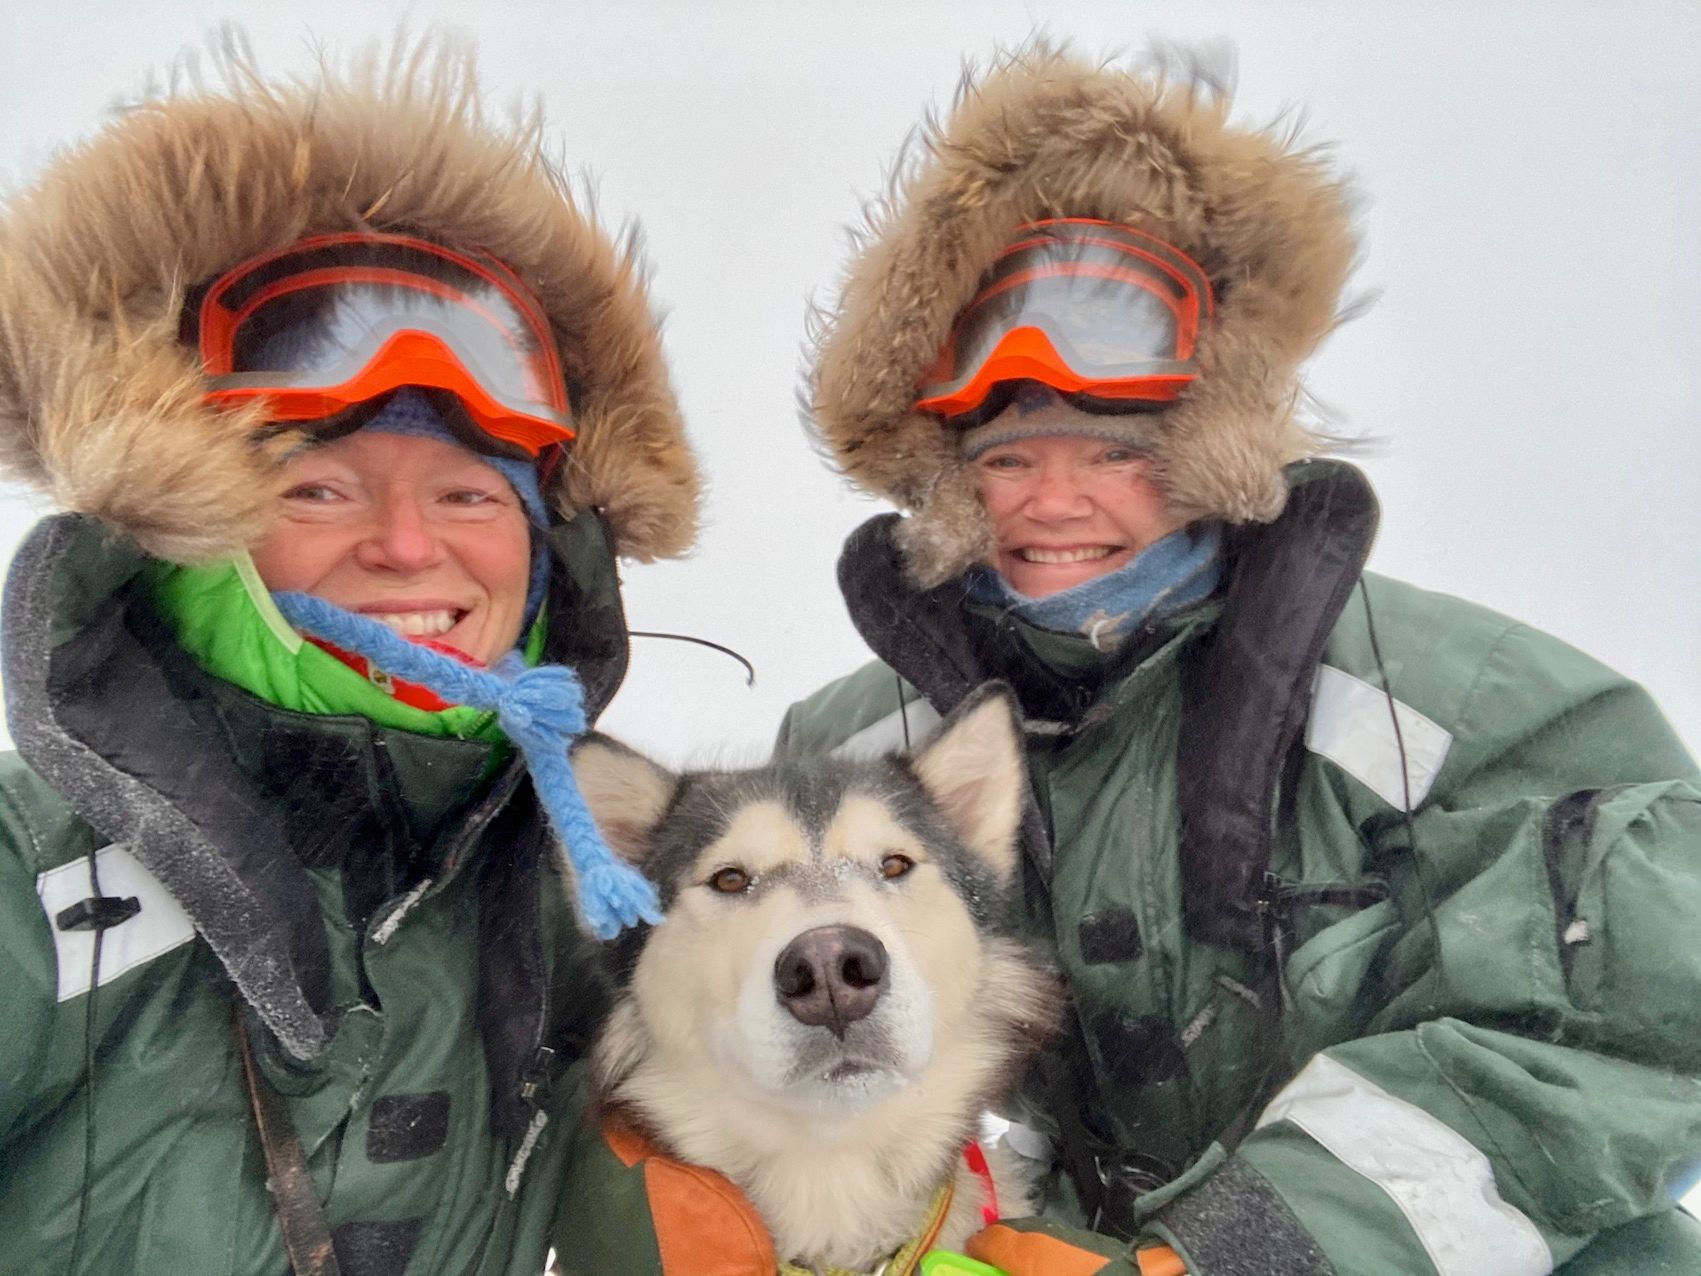 Sunniva Sorby and Hilde Strøm, the first two women to overwinter without men in the Arctic.